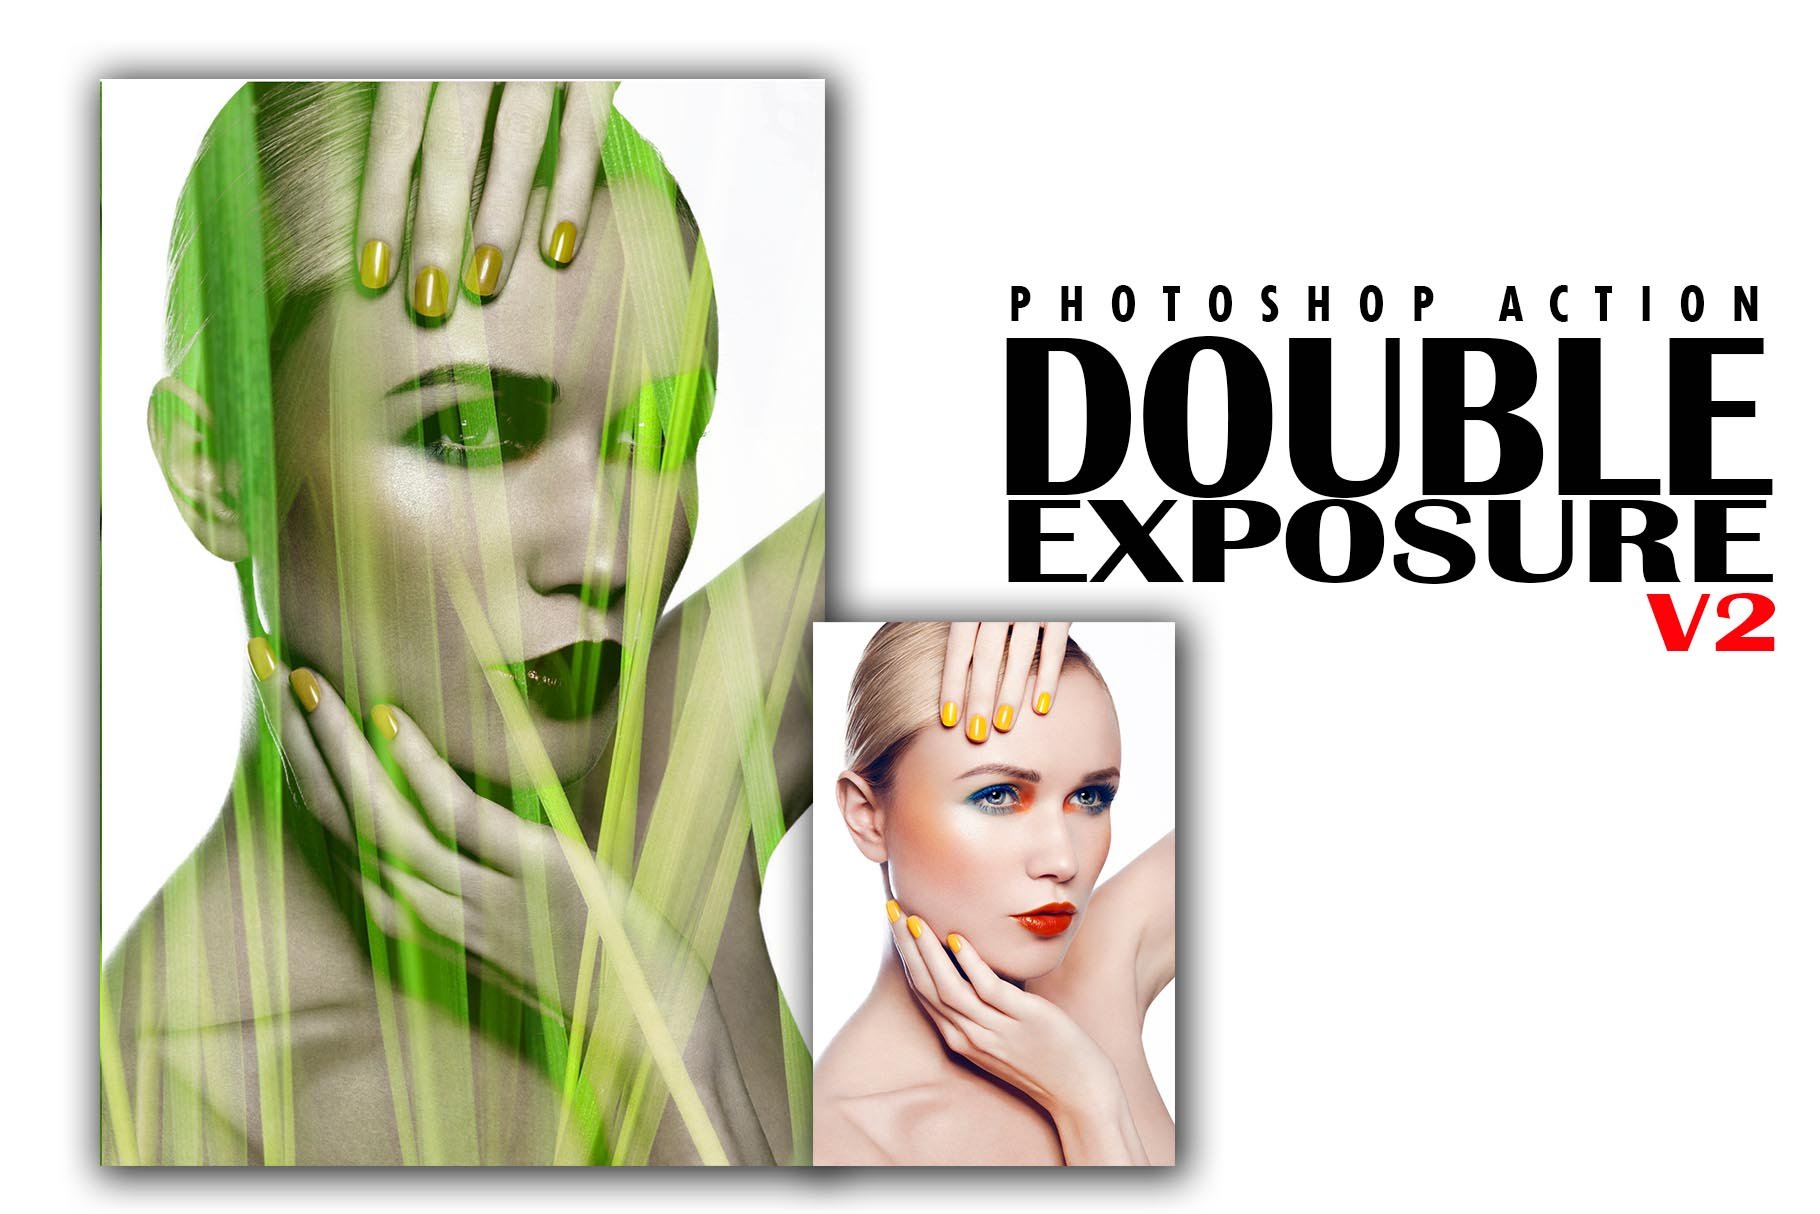 Double Exposure v2 Photoshop Actionpreview image.